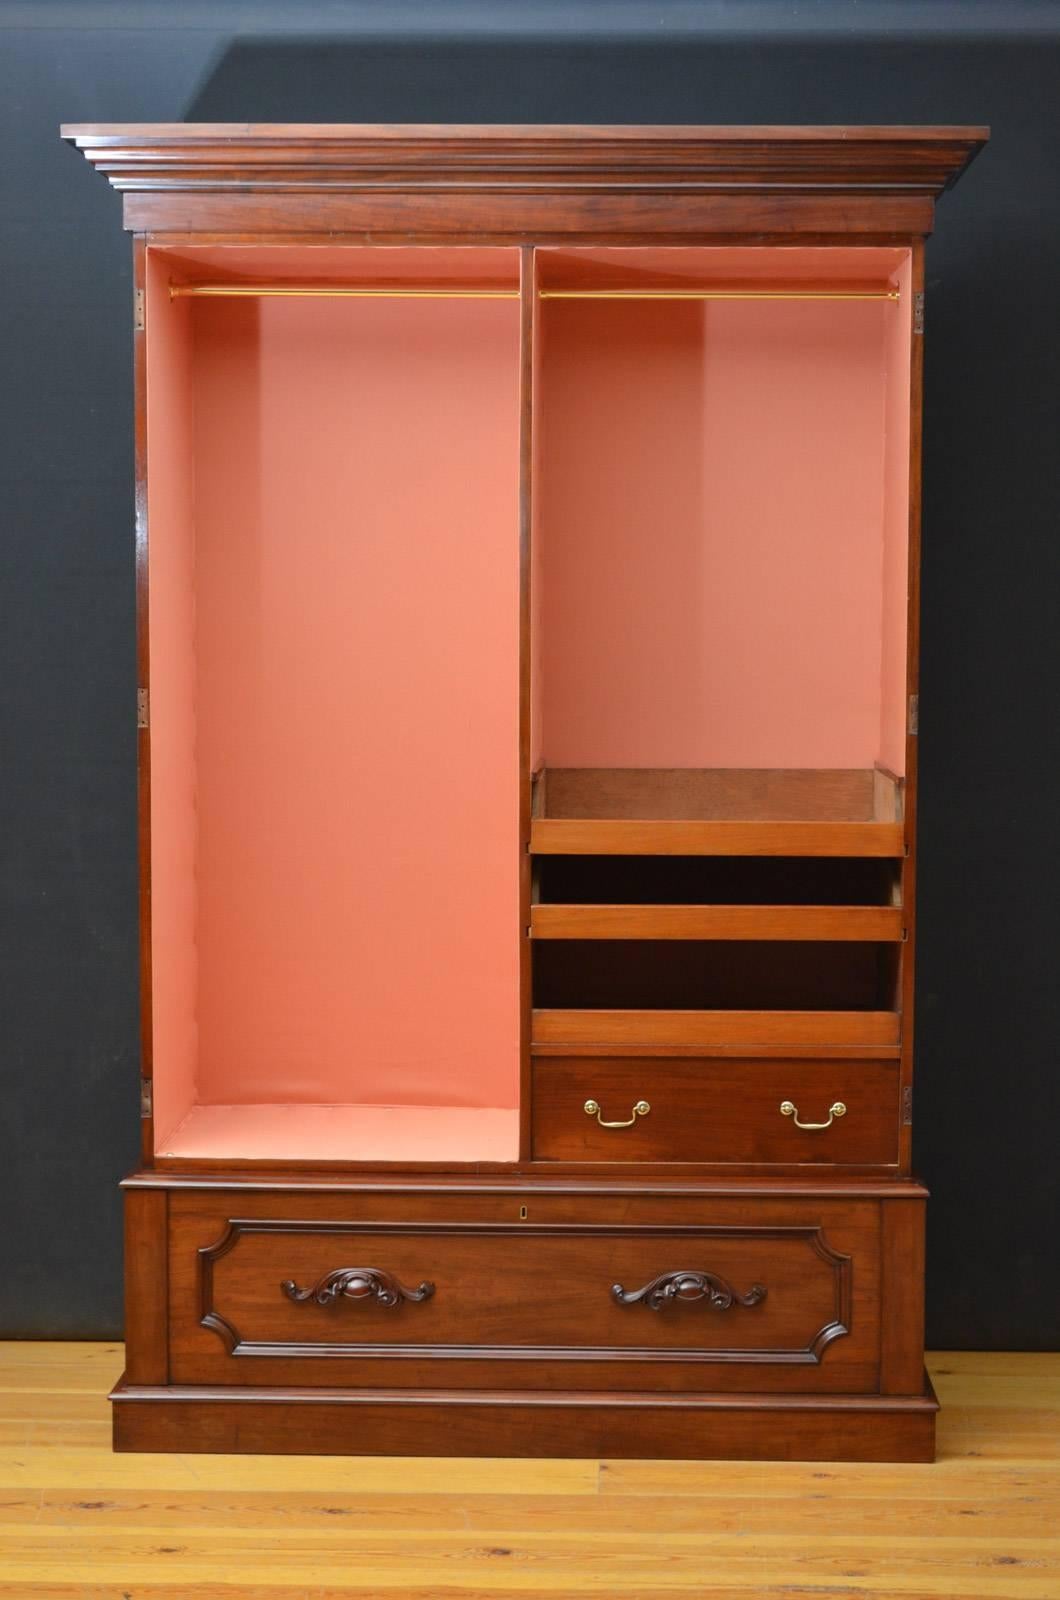 Sn4210 A Victorian two-door wardrobe in mahogany with cavetto cornice, pair of arched and panelled figured mahogany doors enclosing hanging sections and sliders above deep base drawer fitted with finely carved handles, all standing on plinth base.